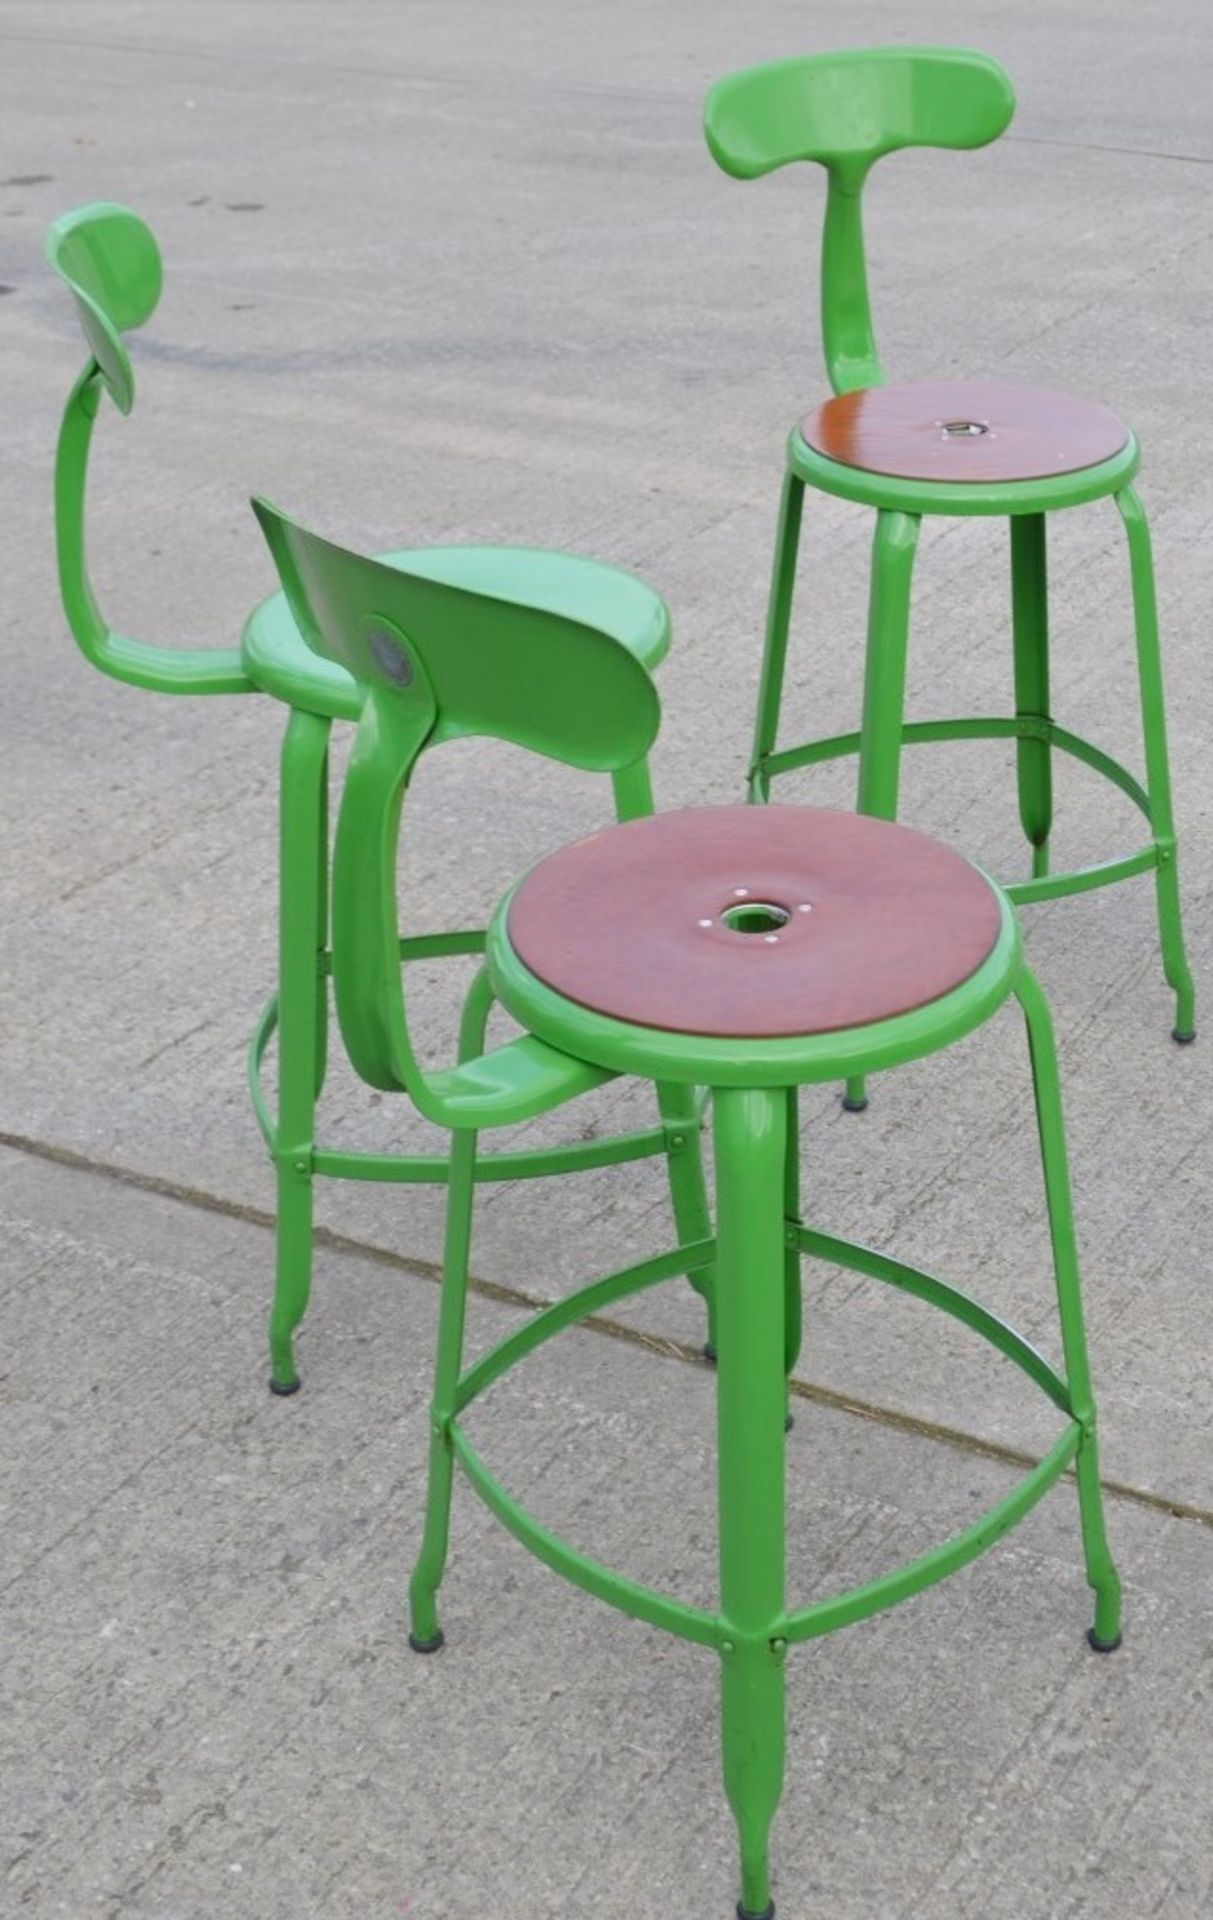 3 x Genuine Nicolle® French Metal Stools In Glossy Green And 2 x Optional Pads - Original Price £900